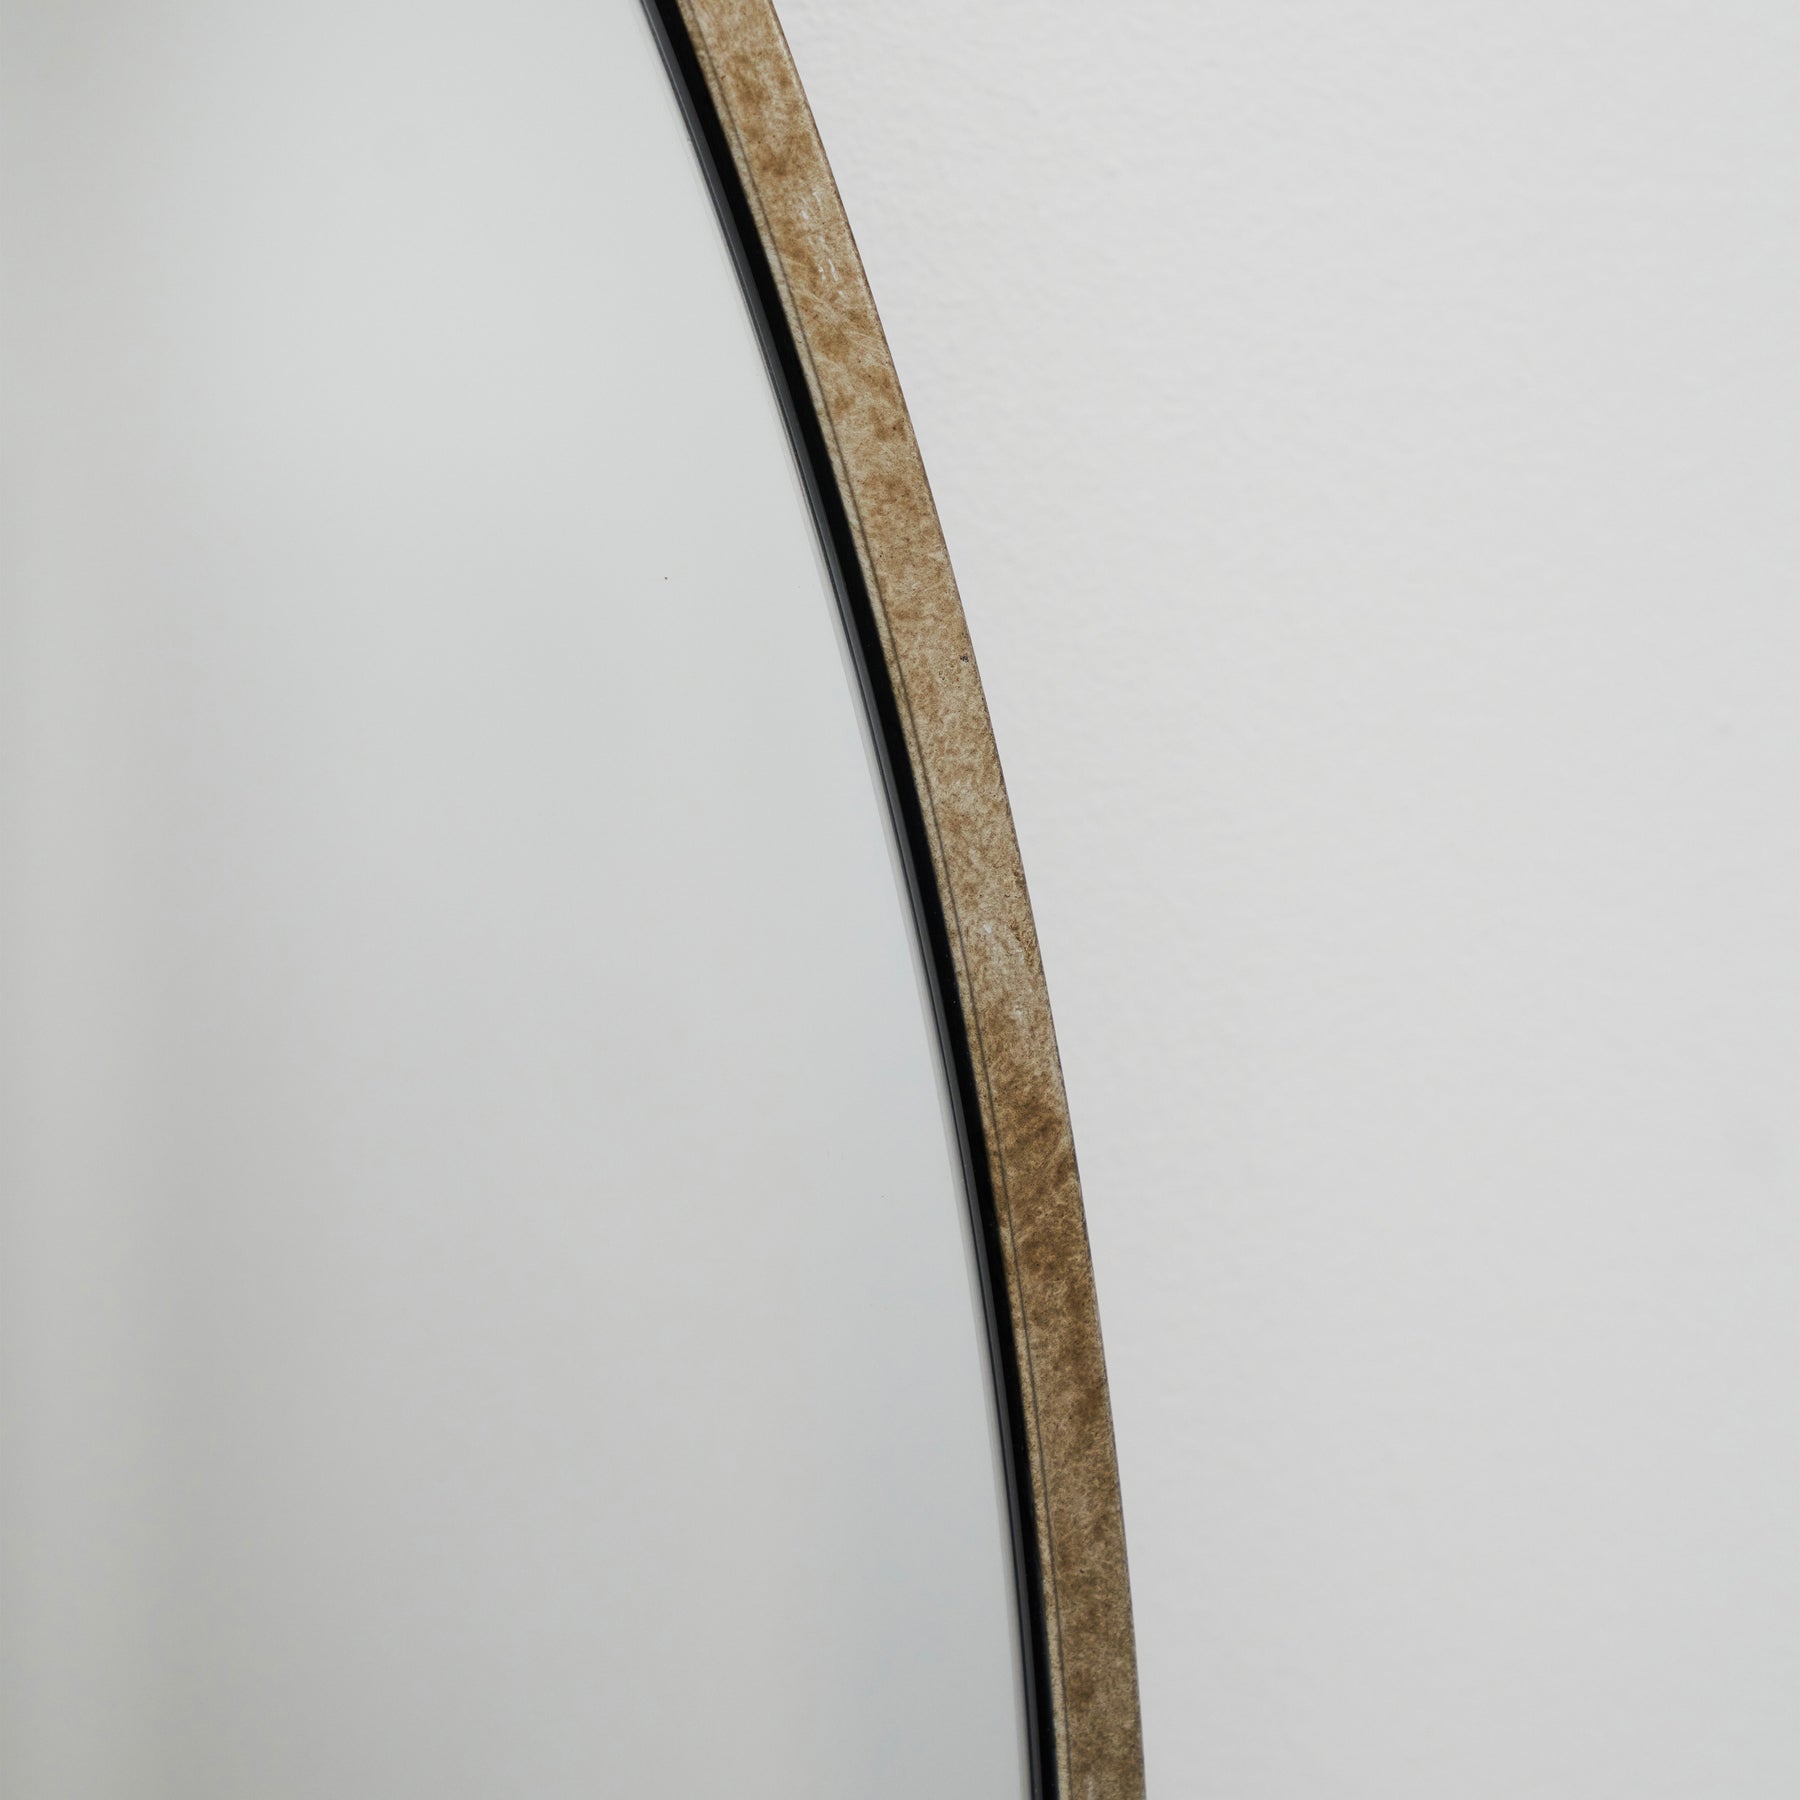 Liberty - Champagne Full Length Arched Metal Mirror 200cm x 120cm